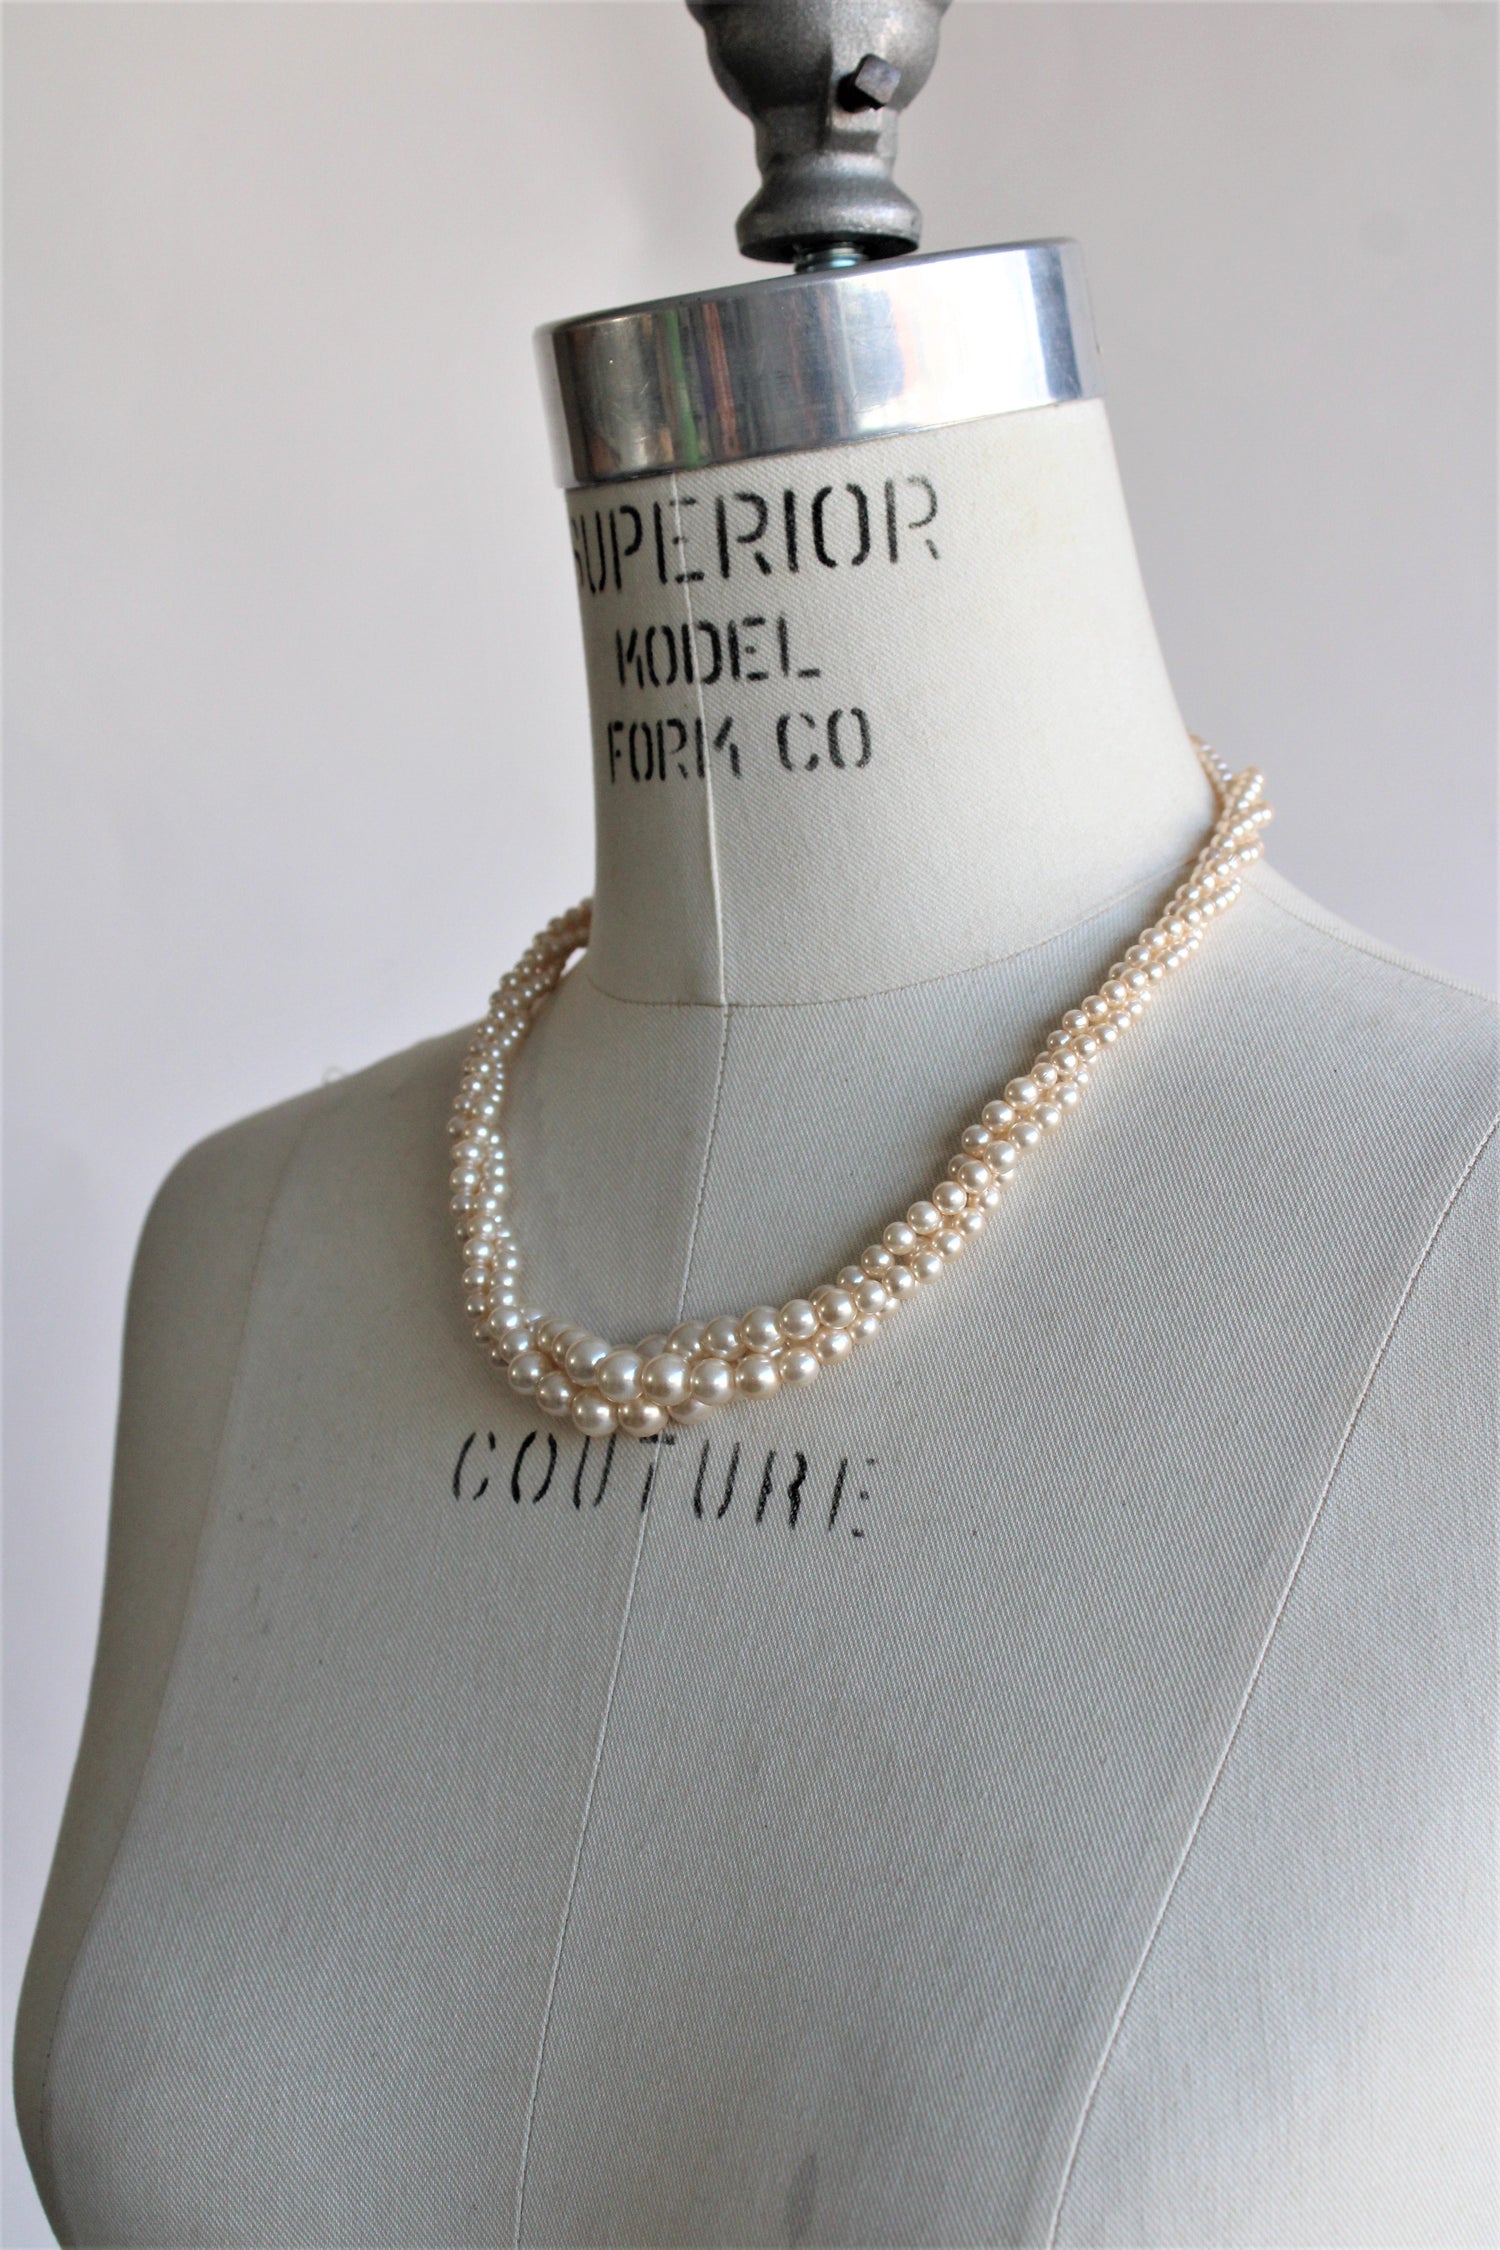 Vintage Napier Three Strand Faux Pearl Necklace